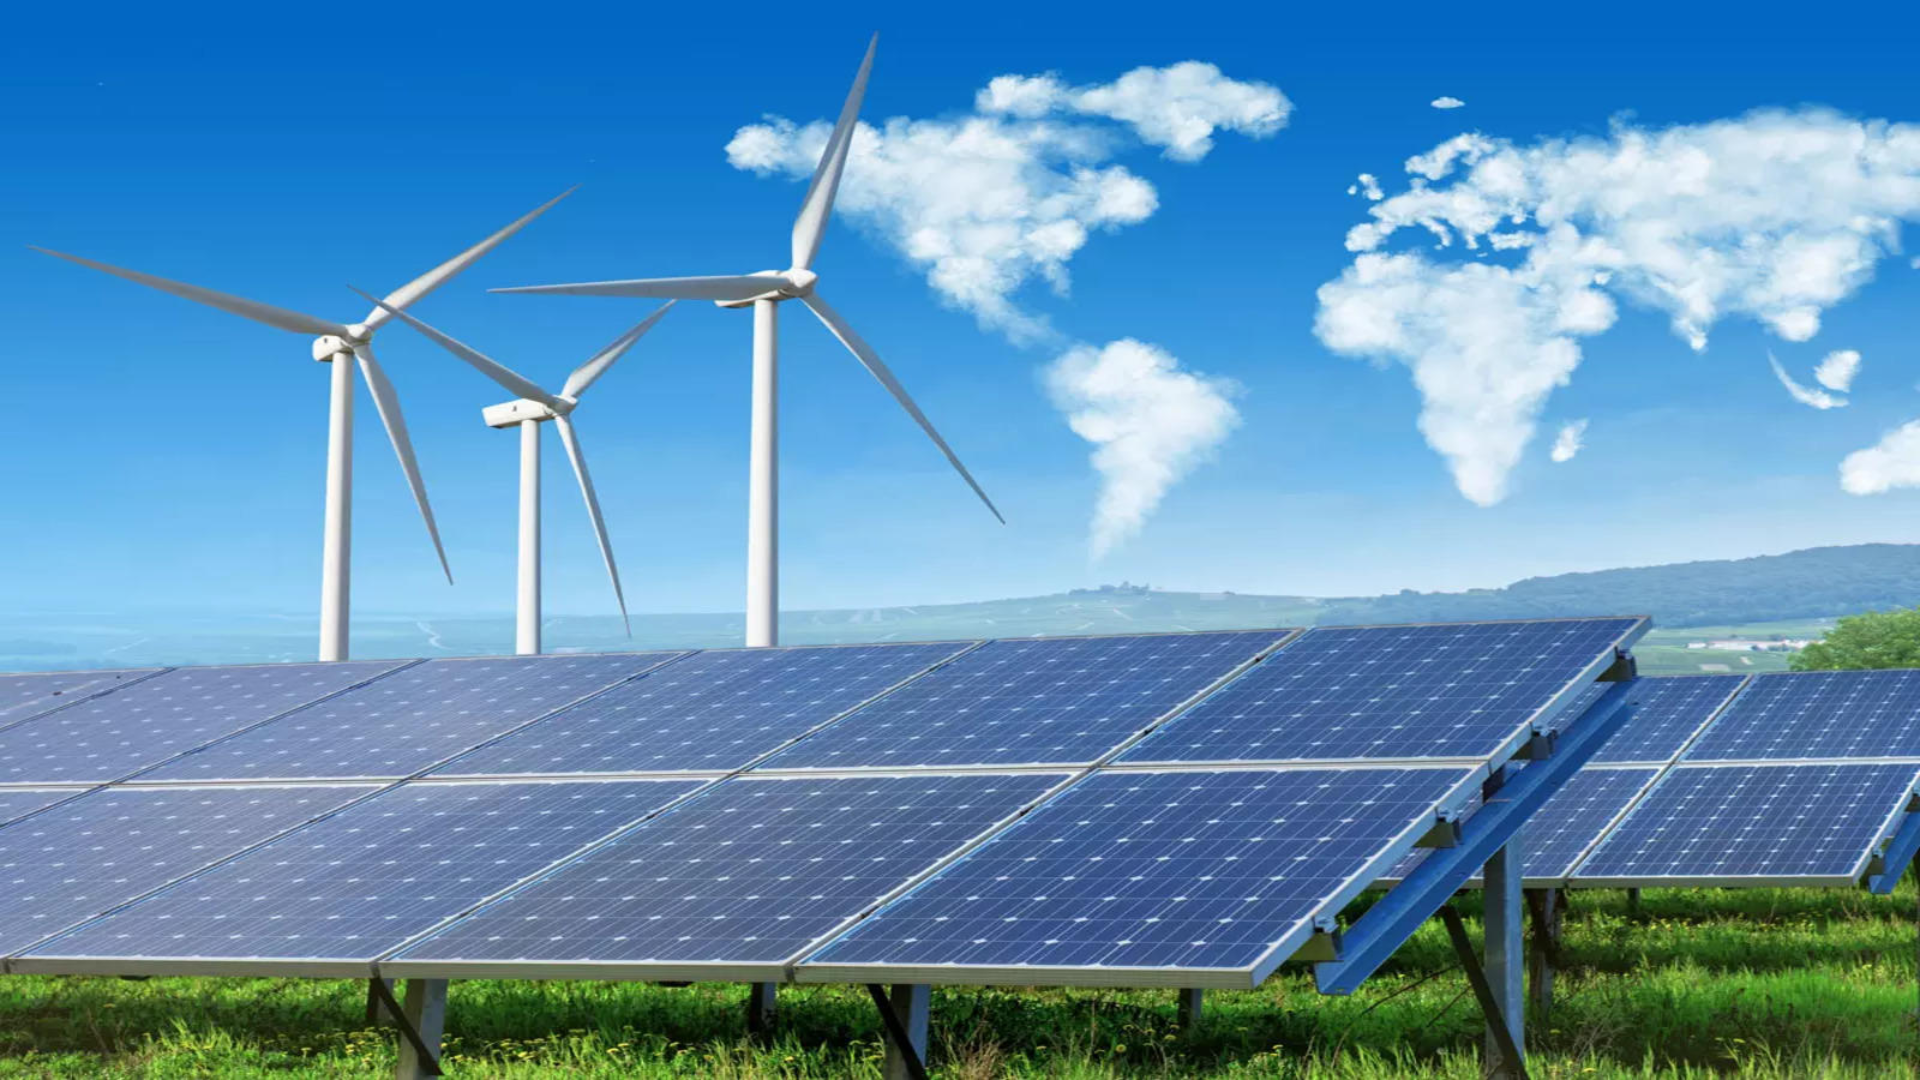 Karnataka and Gujarat Lead Clean Energy Transition in India, Report Highlights